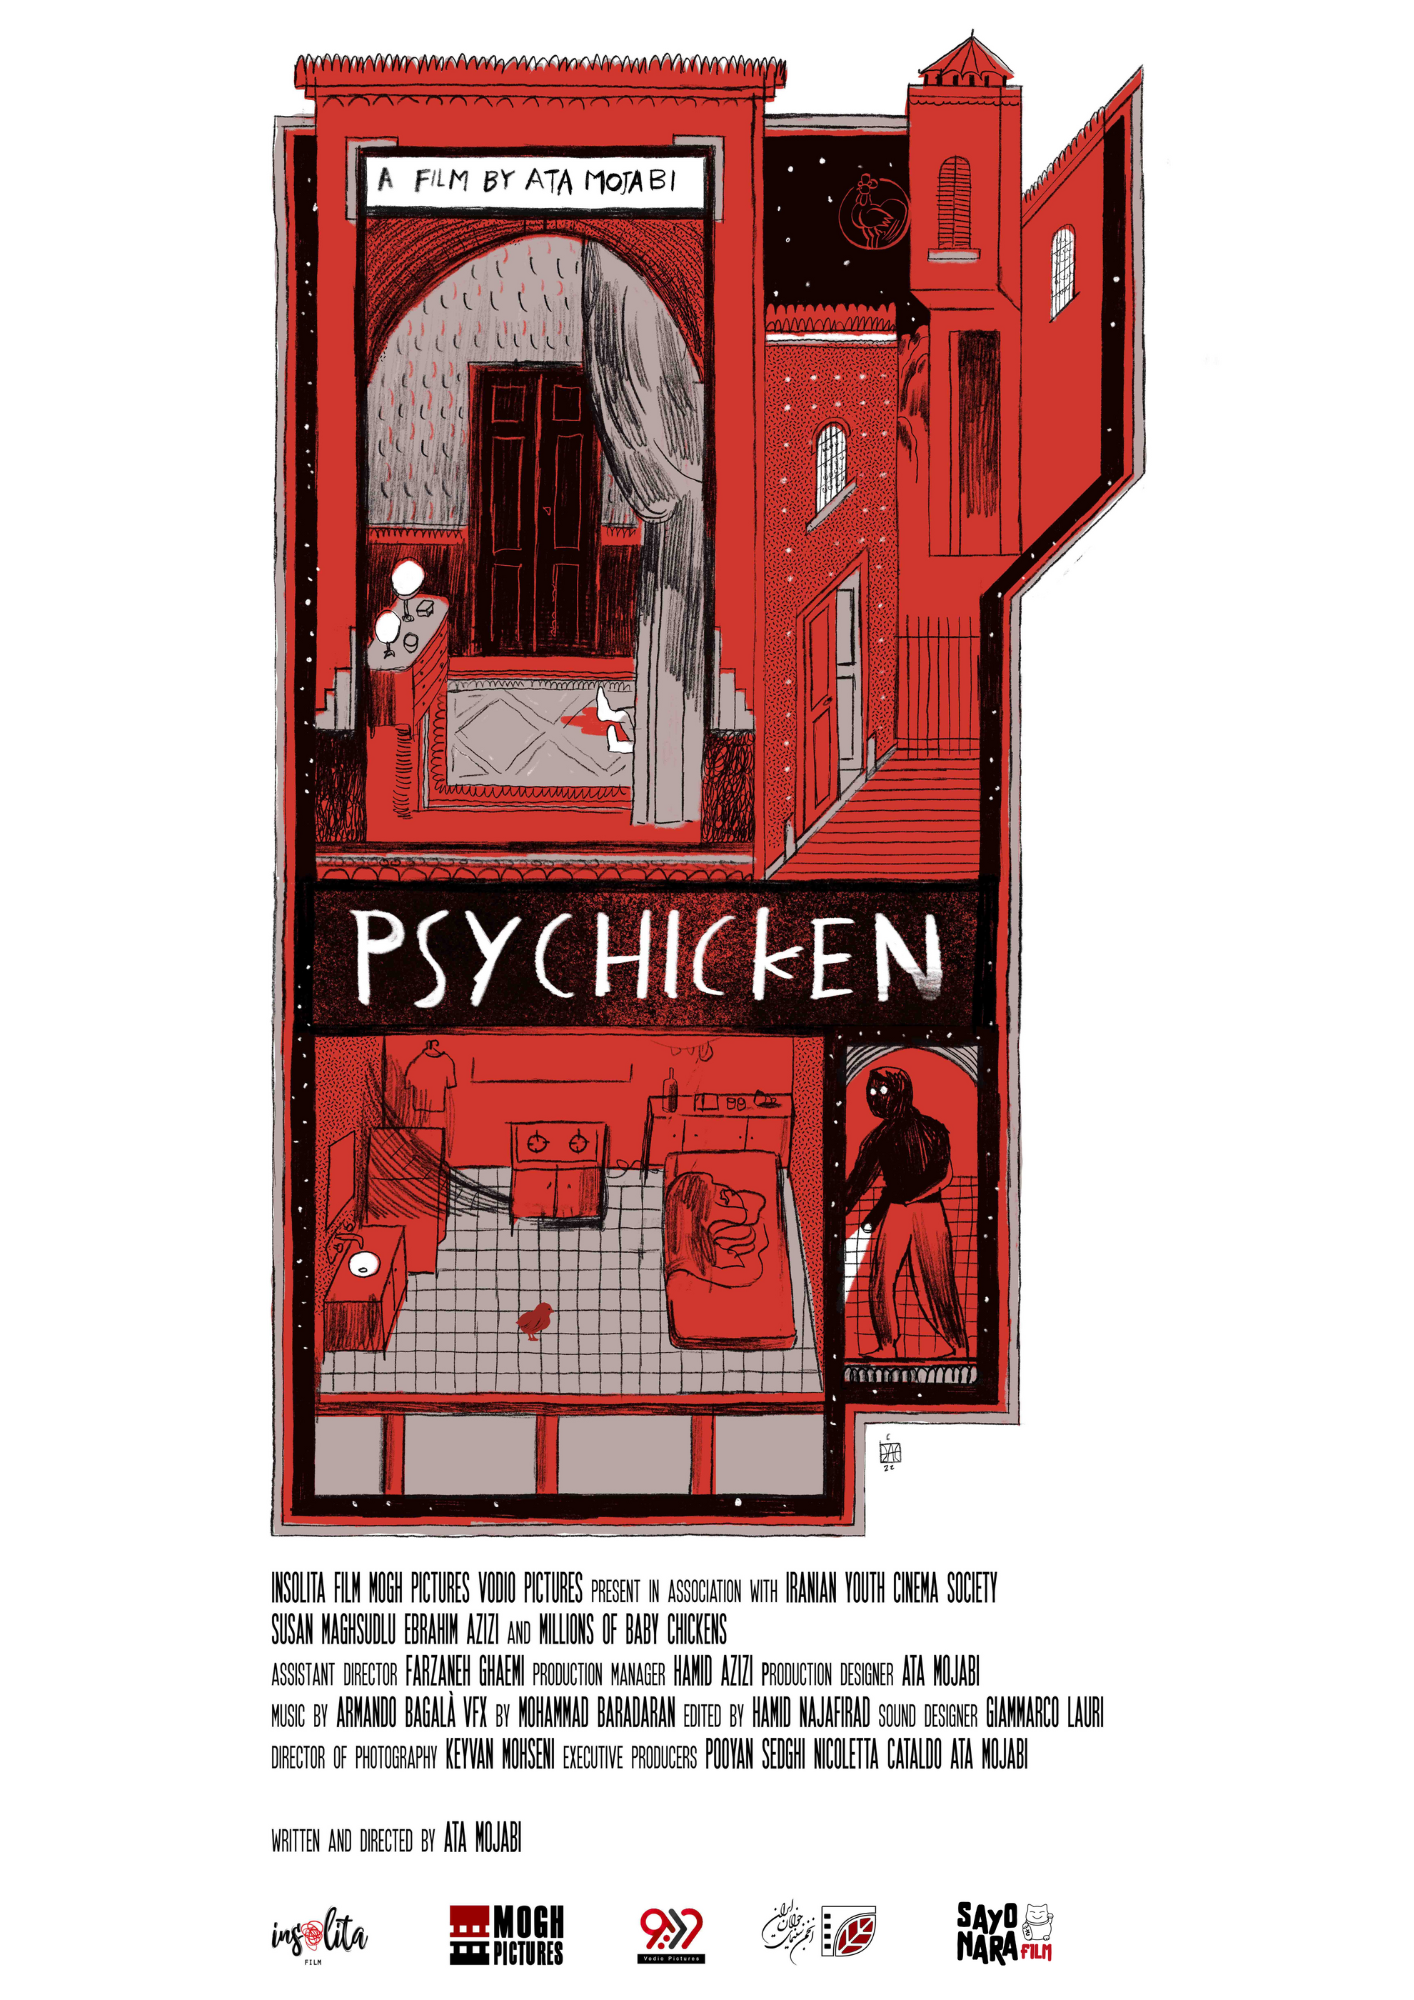 Psychicken<h3 style="font-size:10px; line-height:20px;">di Ata Mojabi</h3>